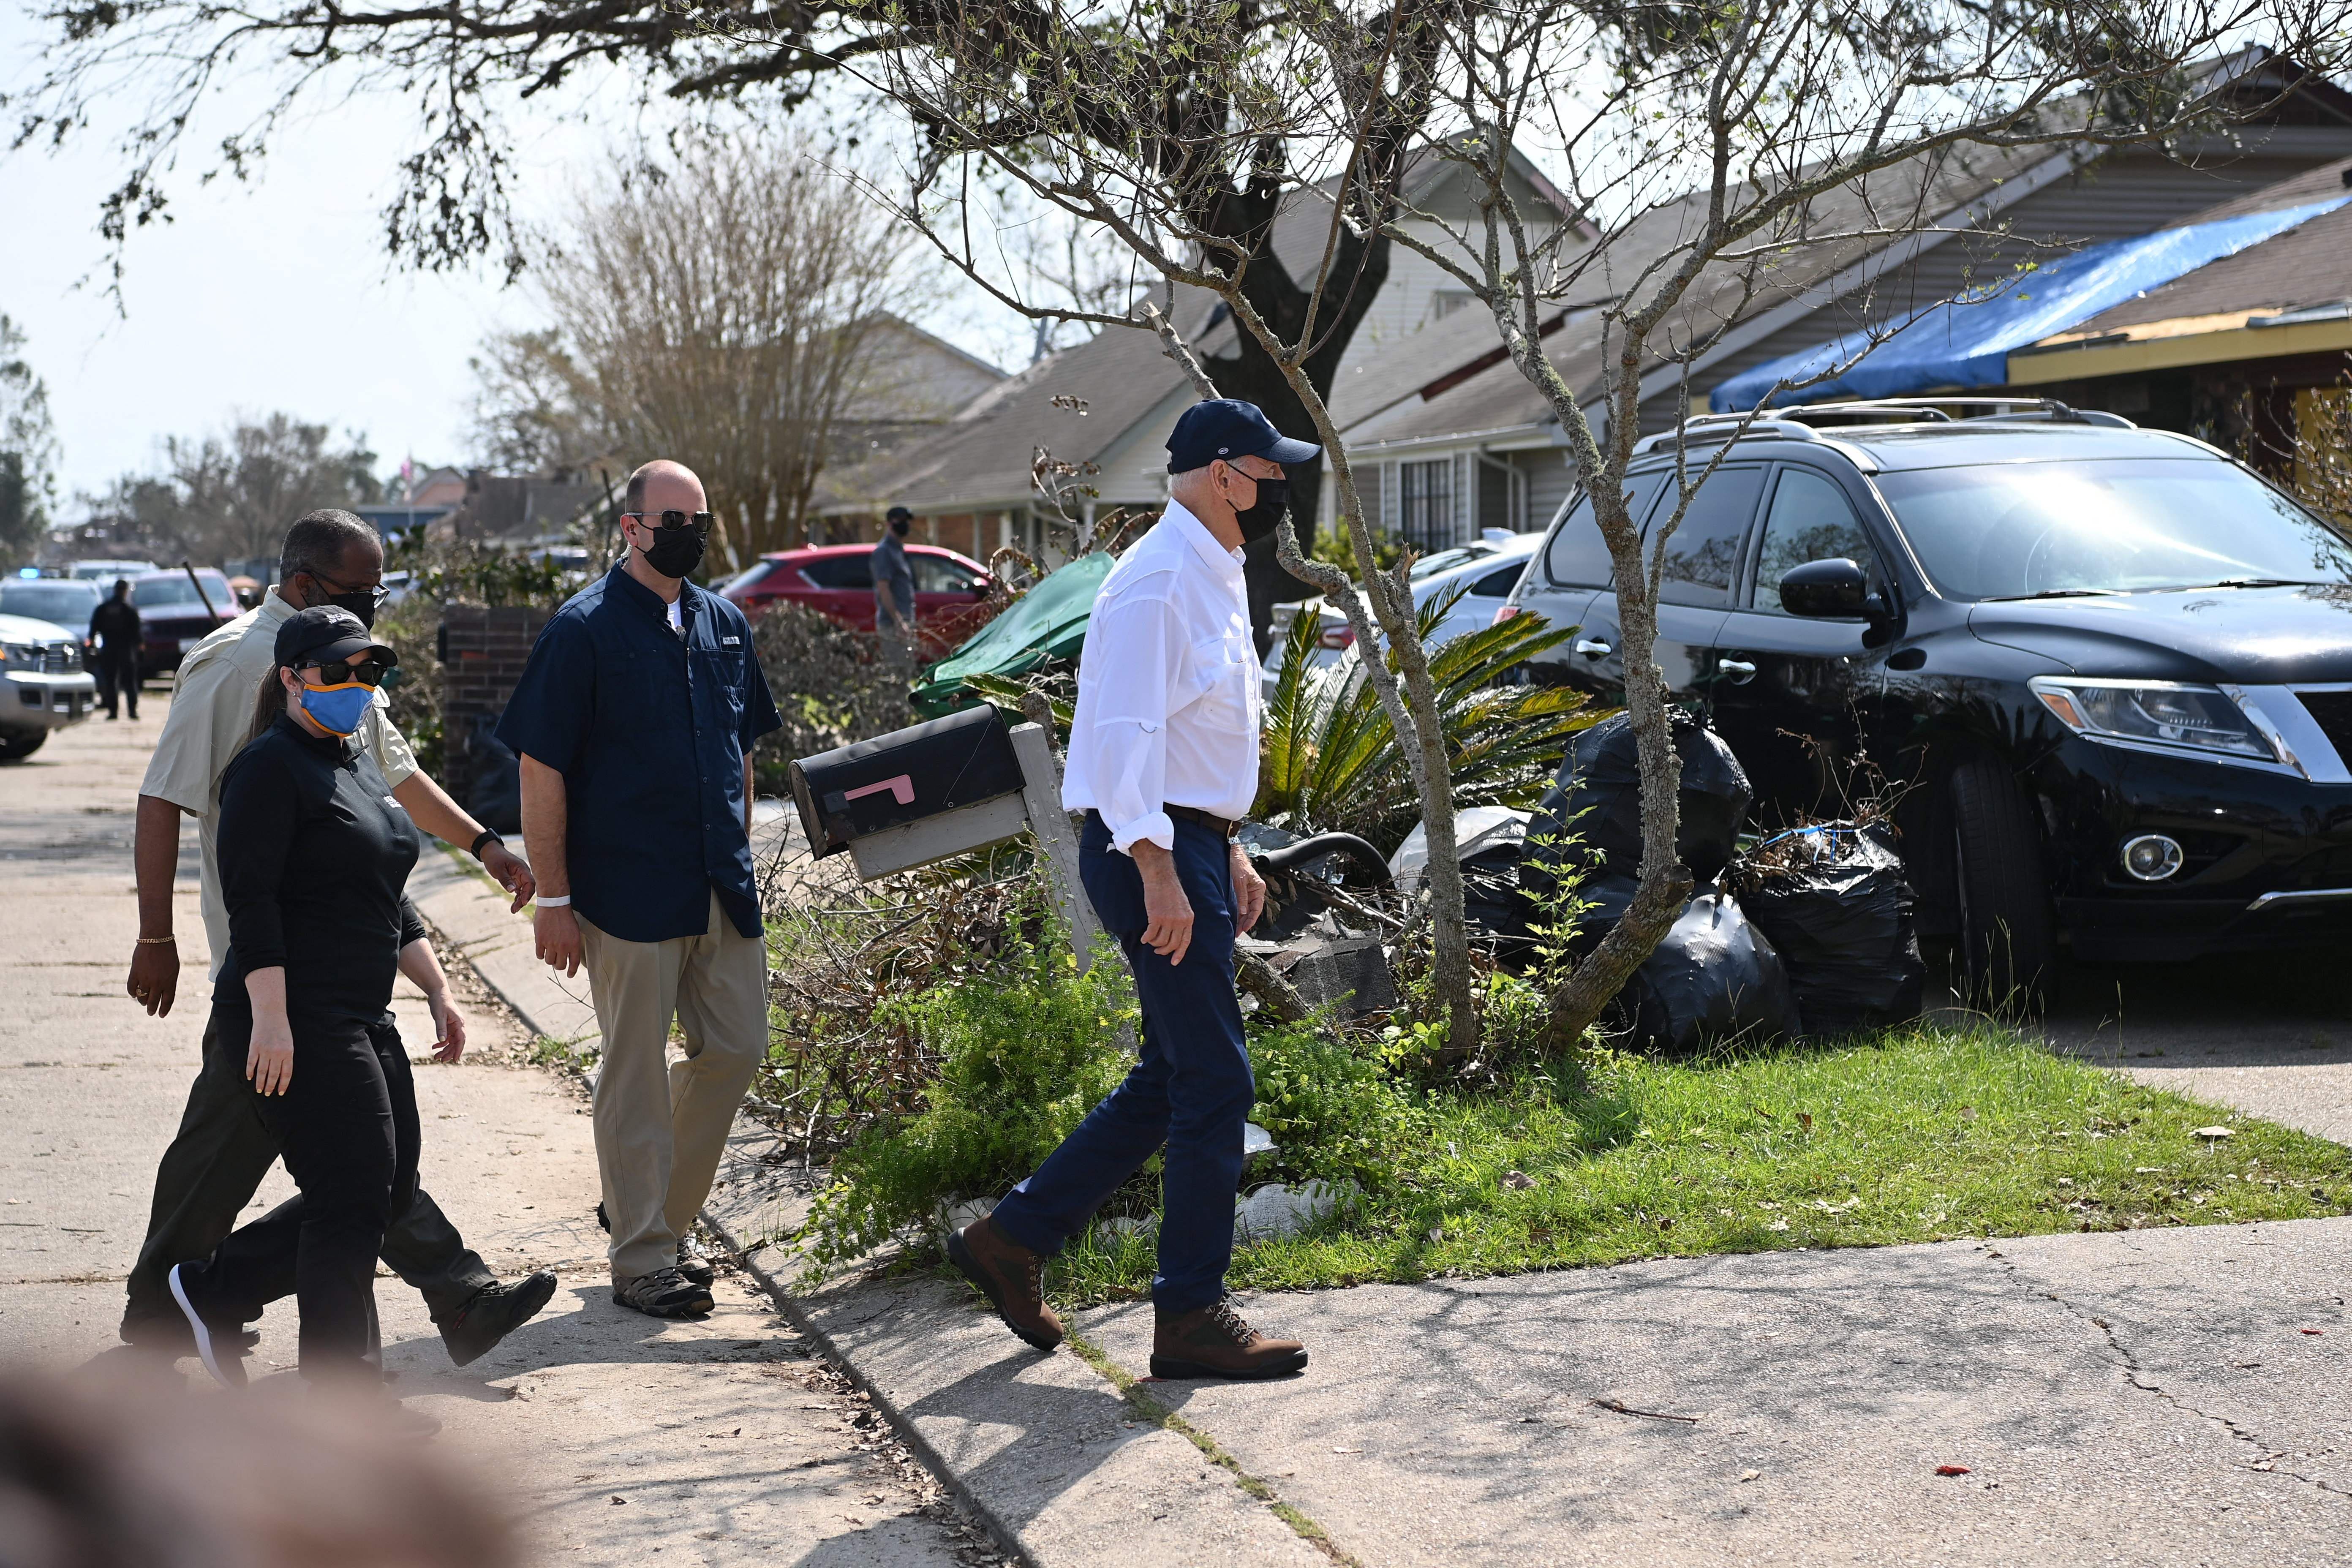 Photo of Joe Biden leading a line of people as they walk and survey damage in a residential neighborhood